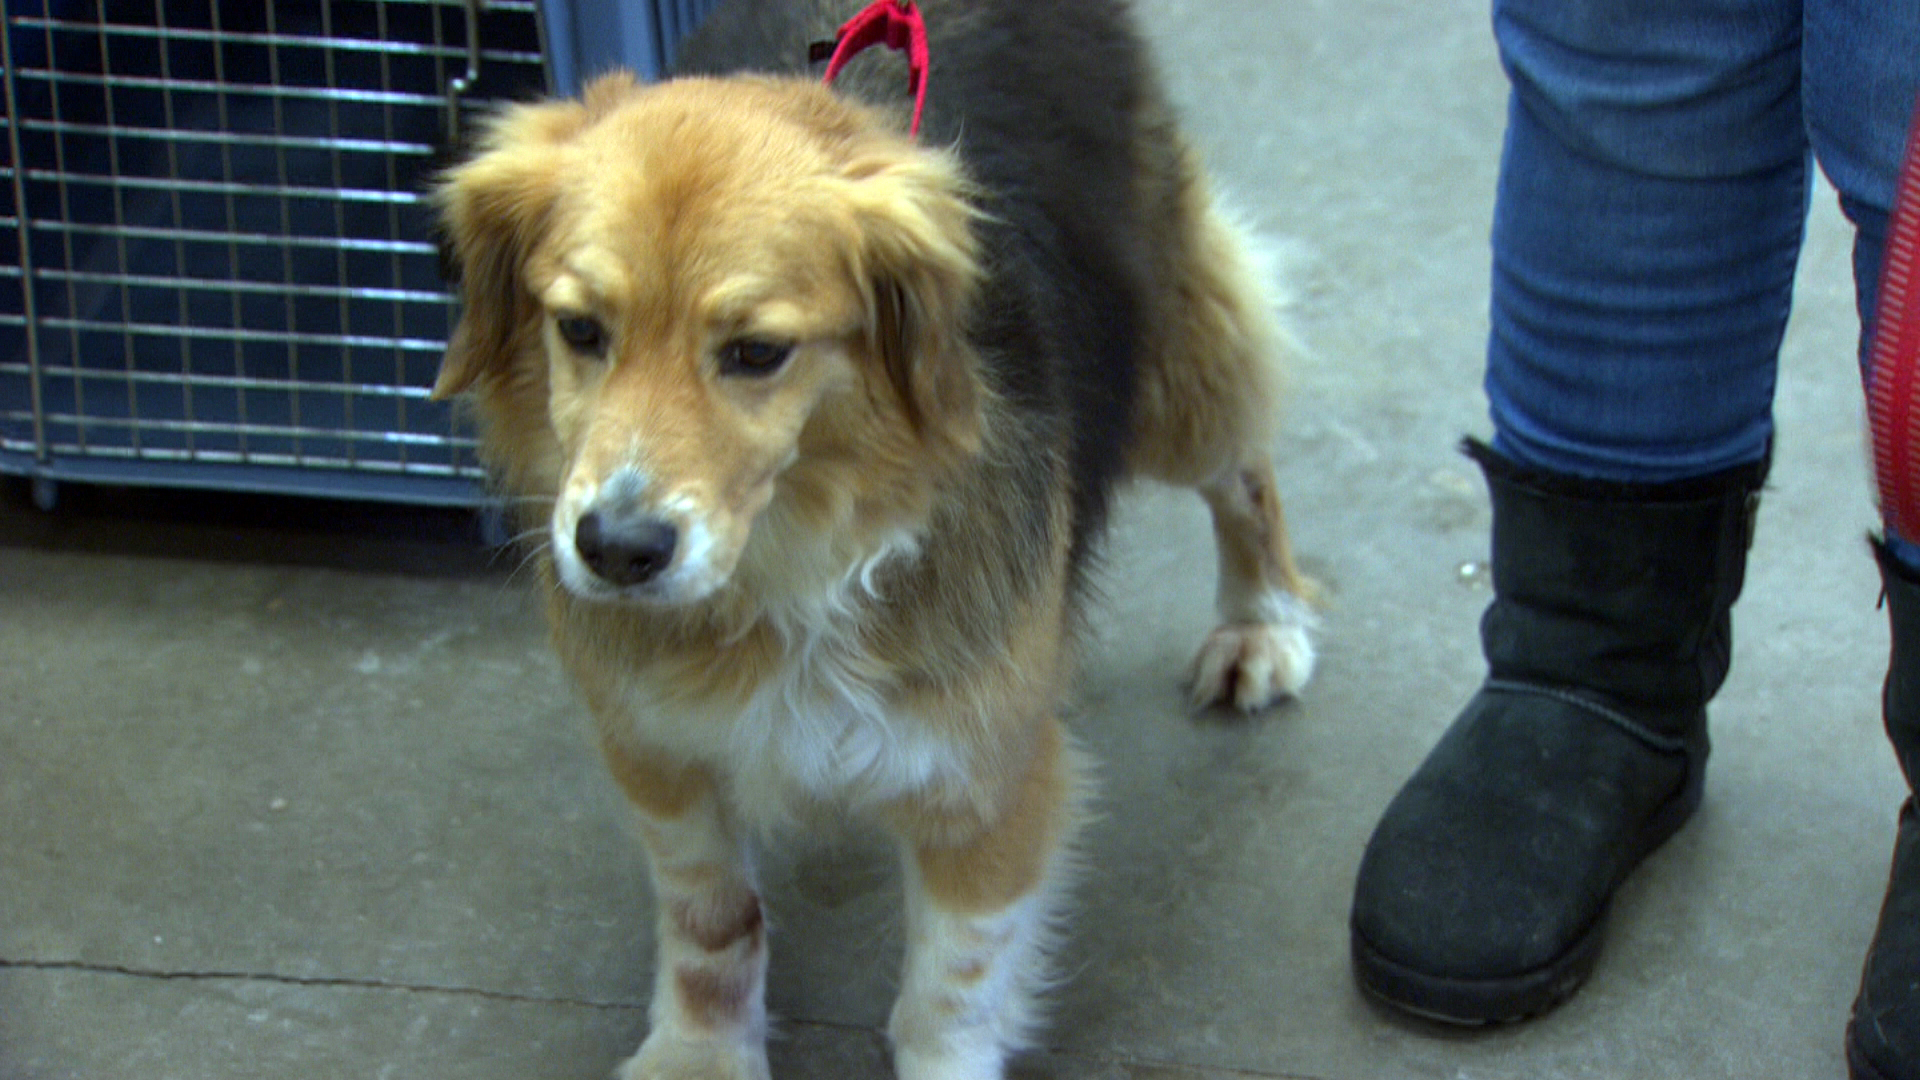 Two Dogs Dumped At Quincy Shelter Receive Medical Treatment – CBS Boston